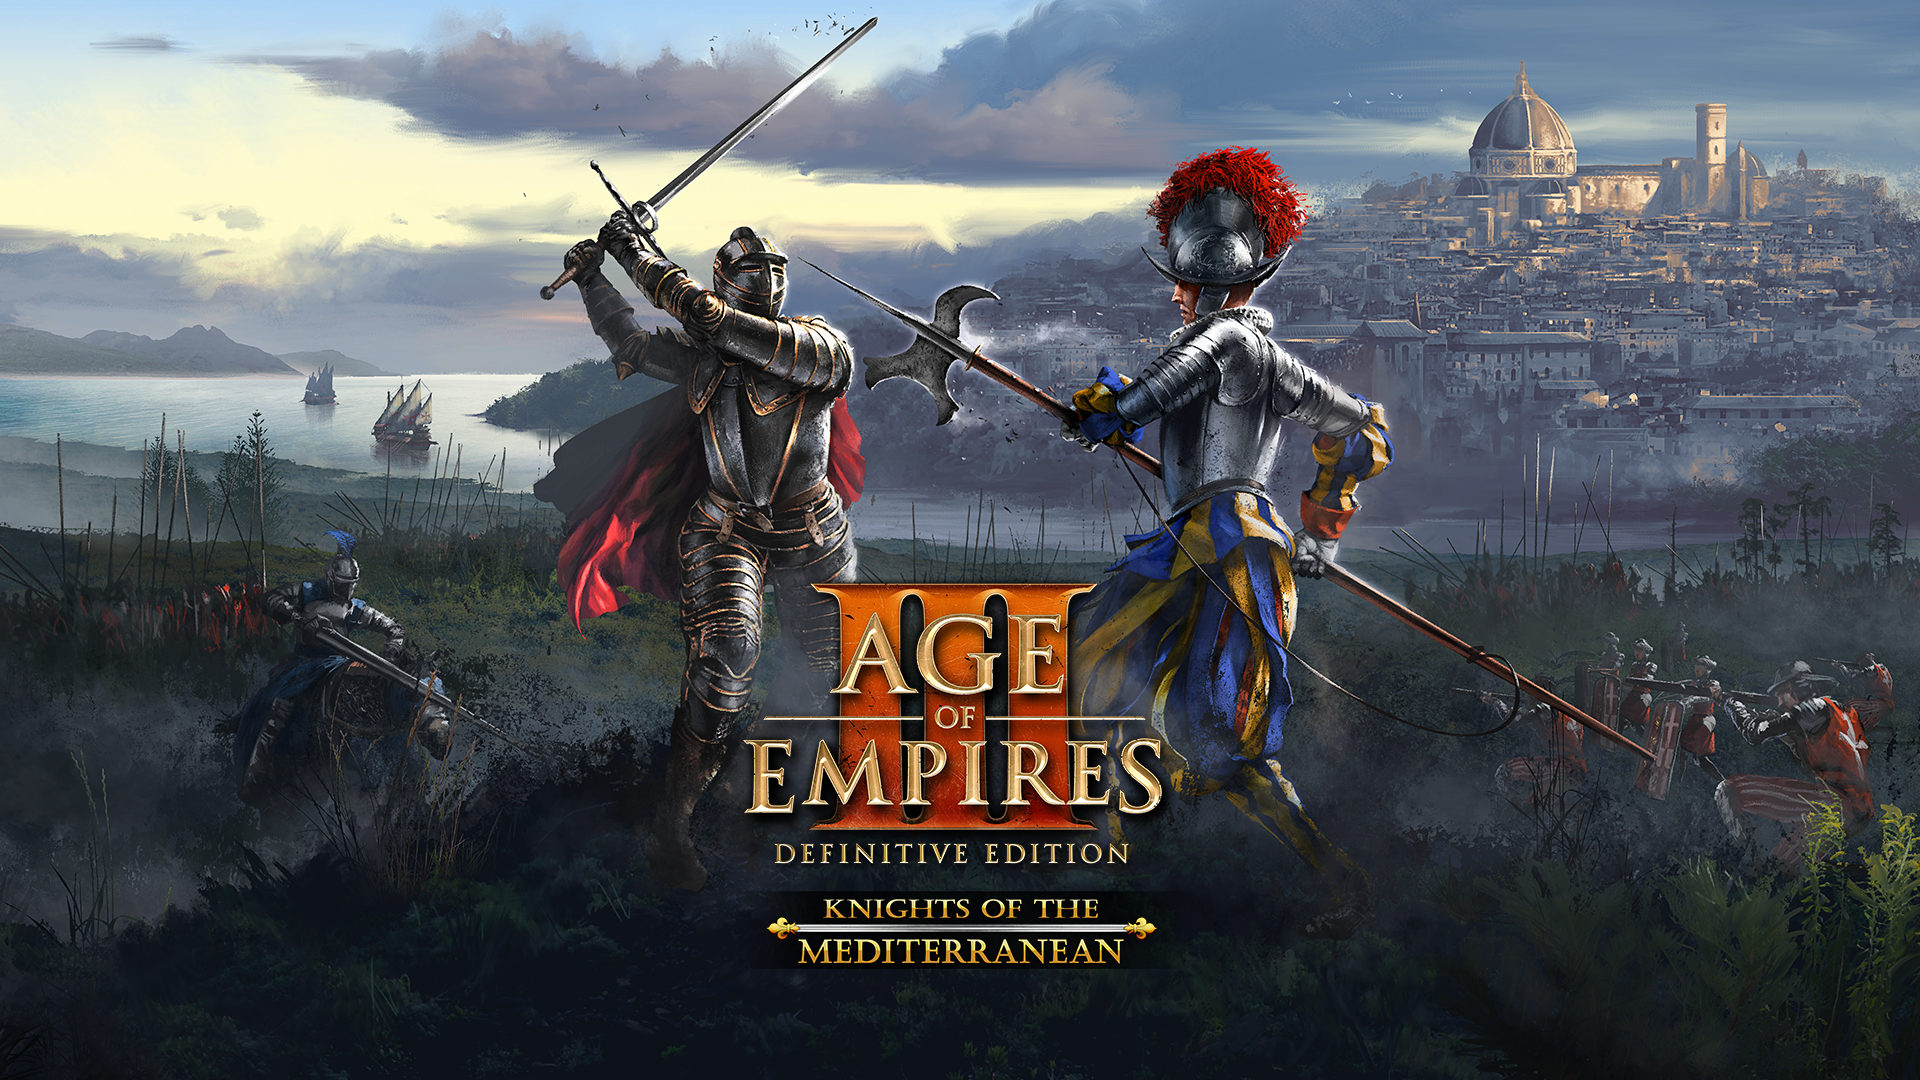 Age of Empires III: Definitive Edition – Introducing Knights of the Mediterranean